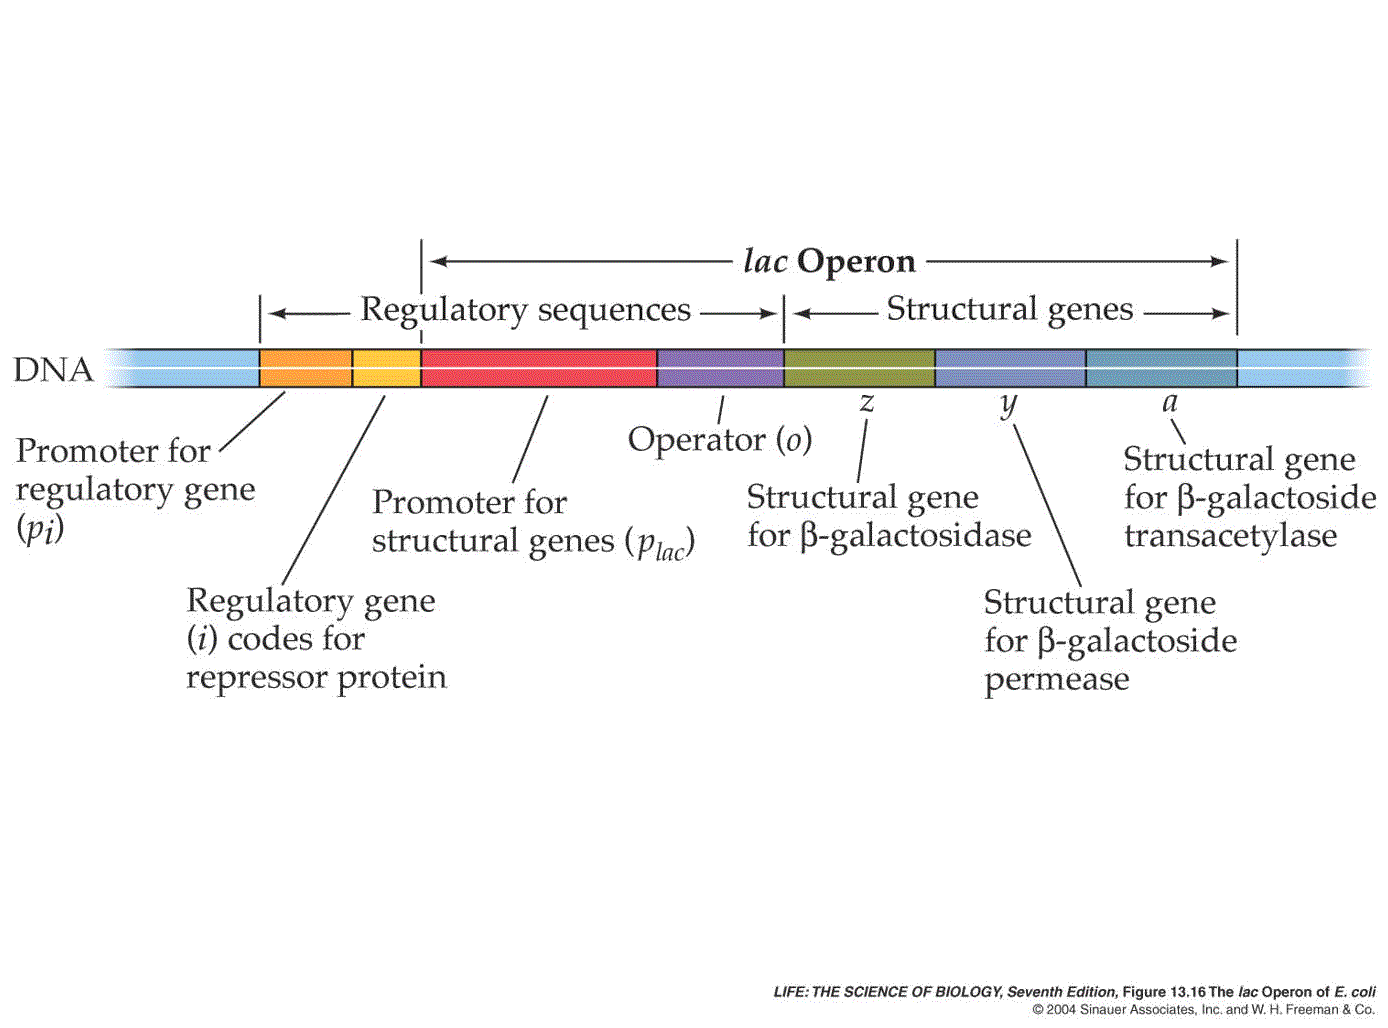 https://quizlet.com/9851684/lac-operon-and-regulation-of-gene-expression-flash-cards/